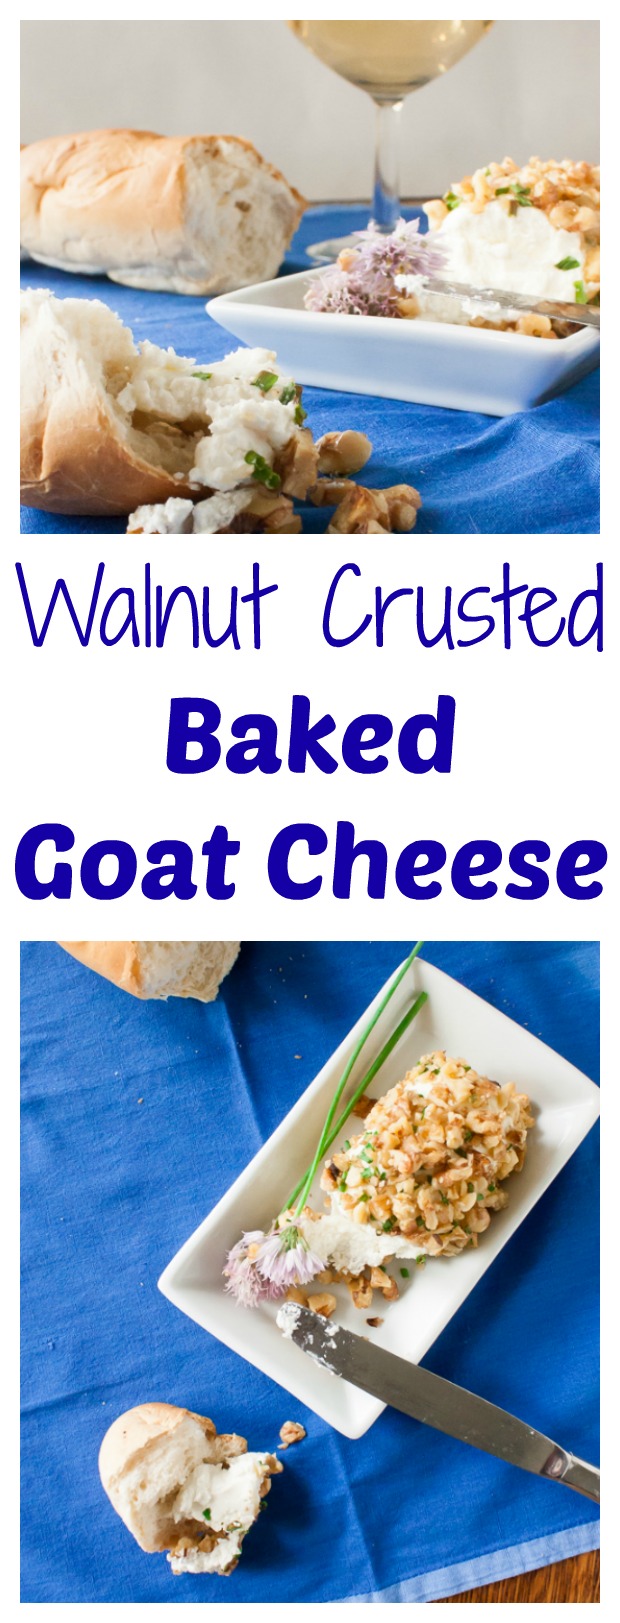 Melty goat cheese. Toasted walnuts. Easy, classy app: Walnut Crusted Baked Goat Cheese | @tspcurry